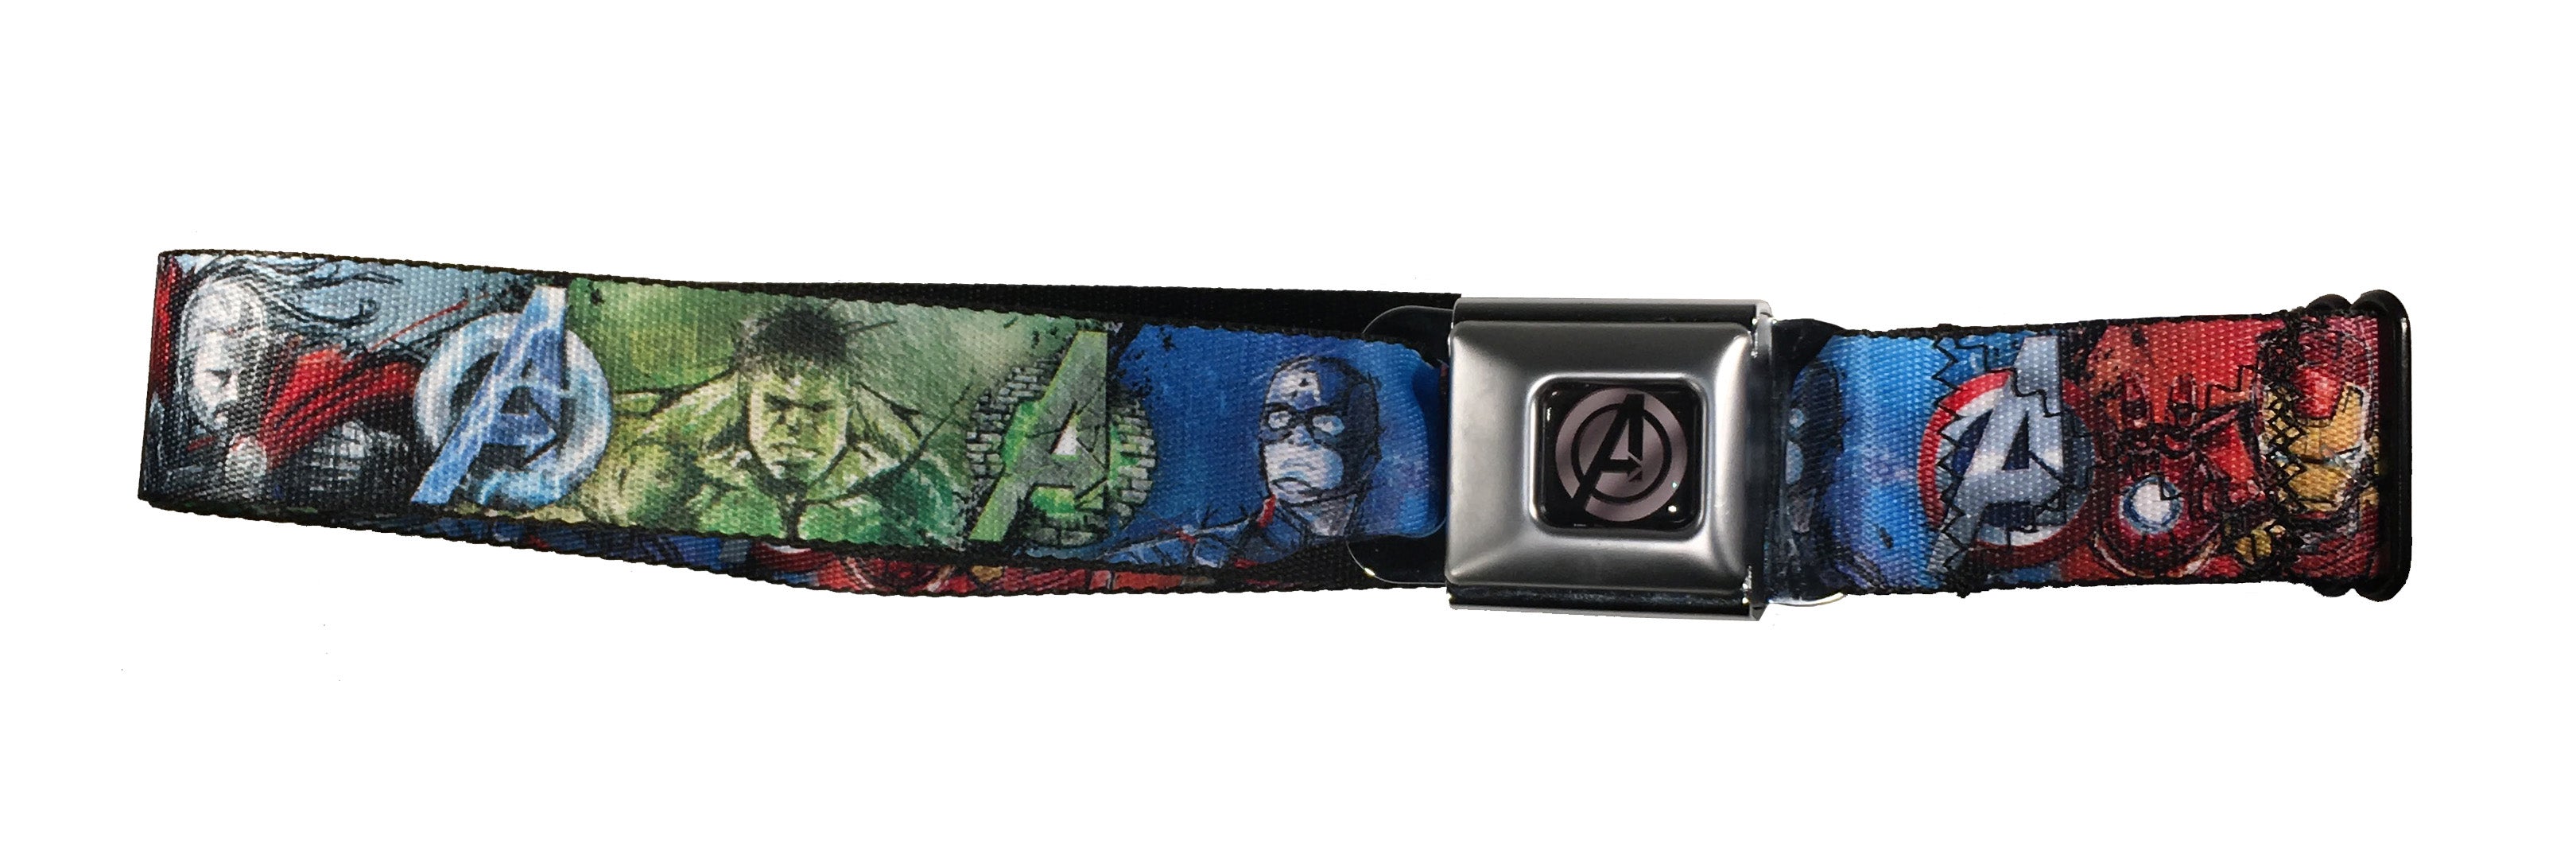 Avengers Age of Ultron Character Line-Up Belt